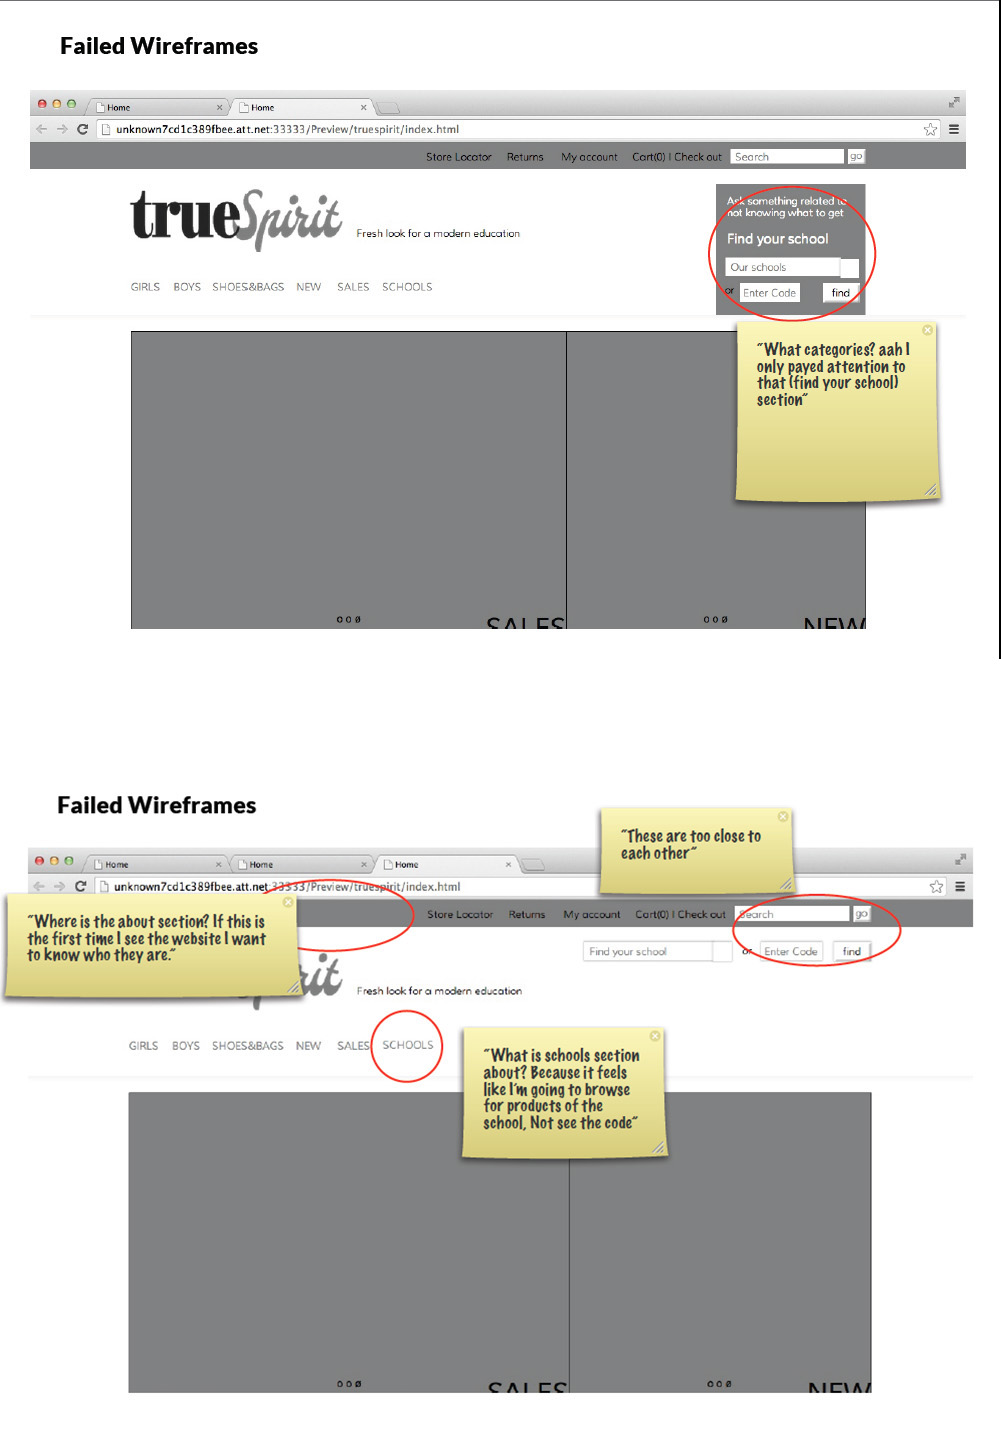 Image of wireframe with user feedback notes for corrections